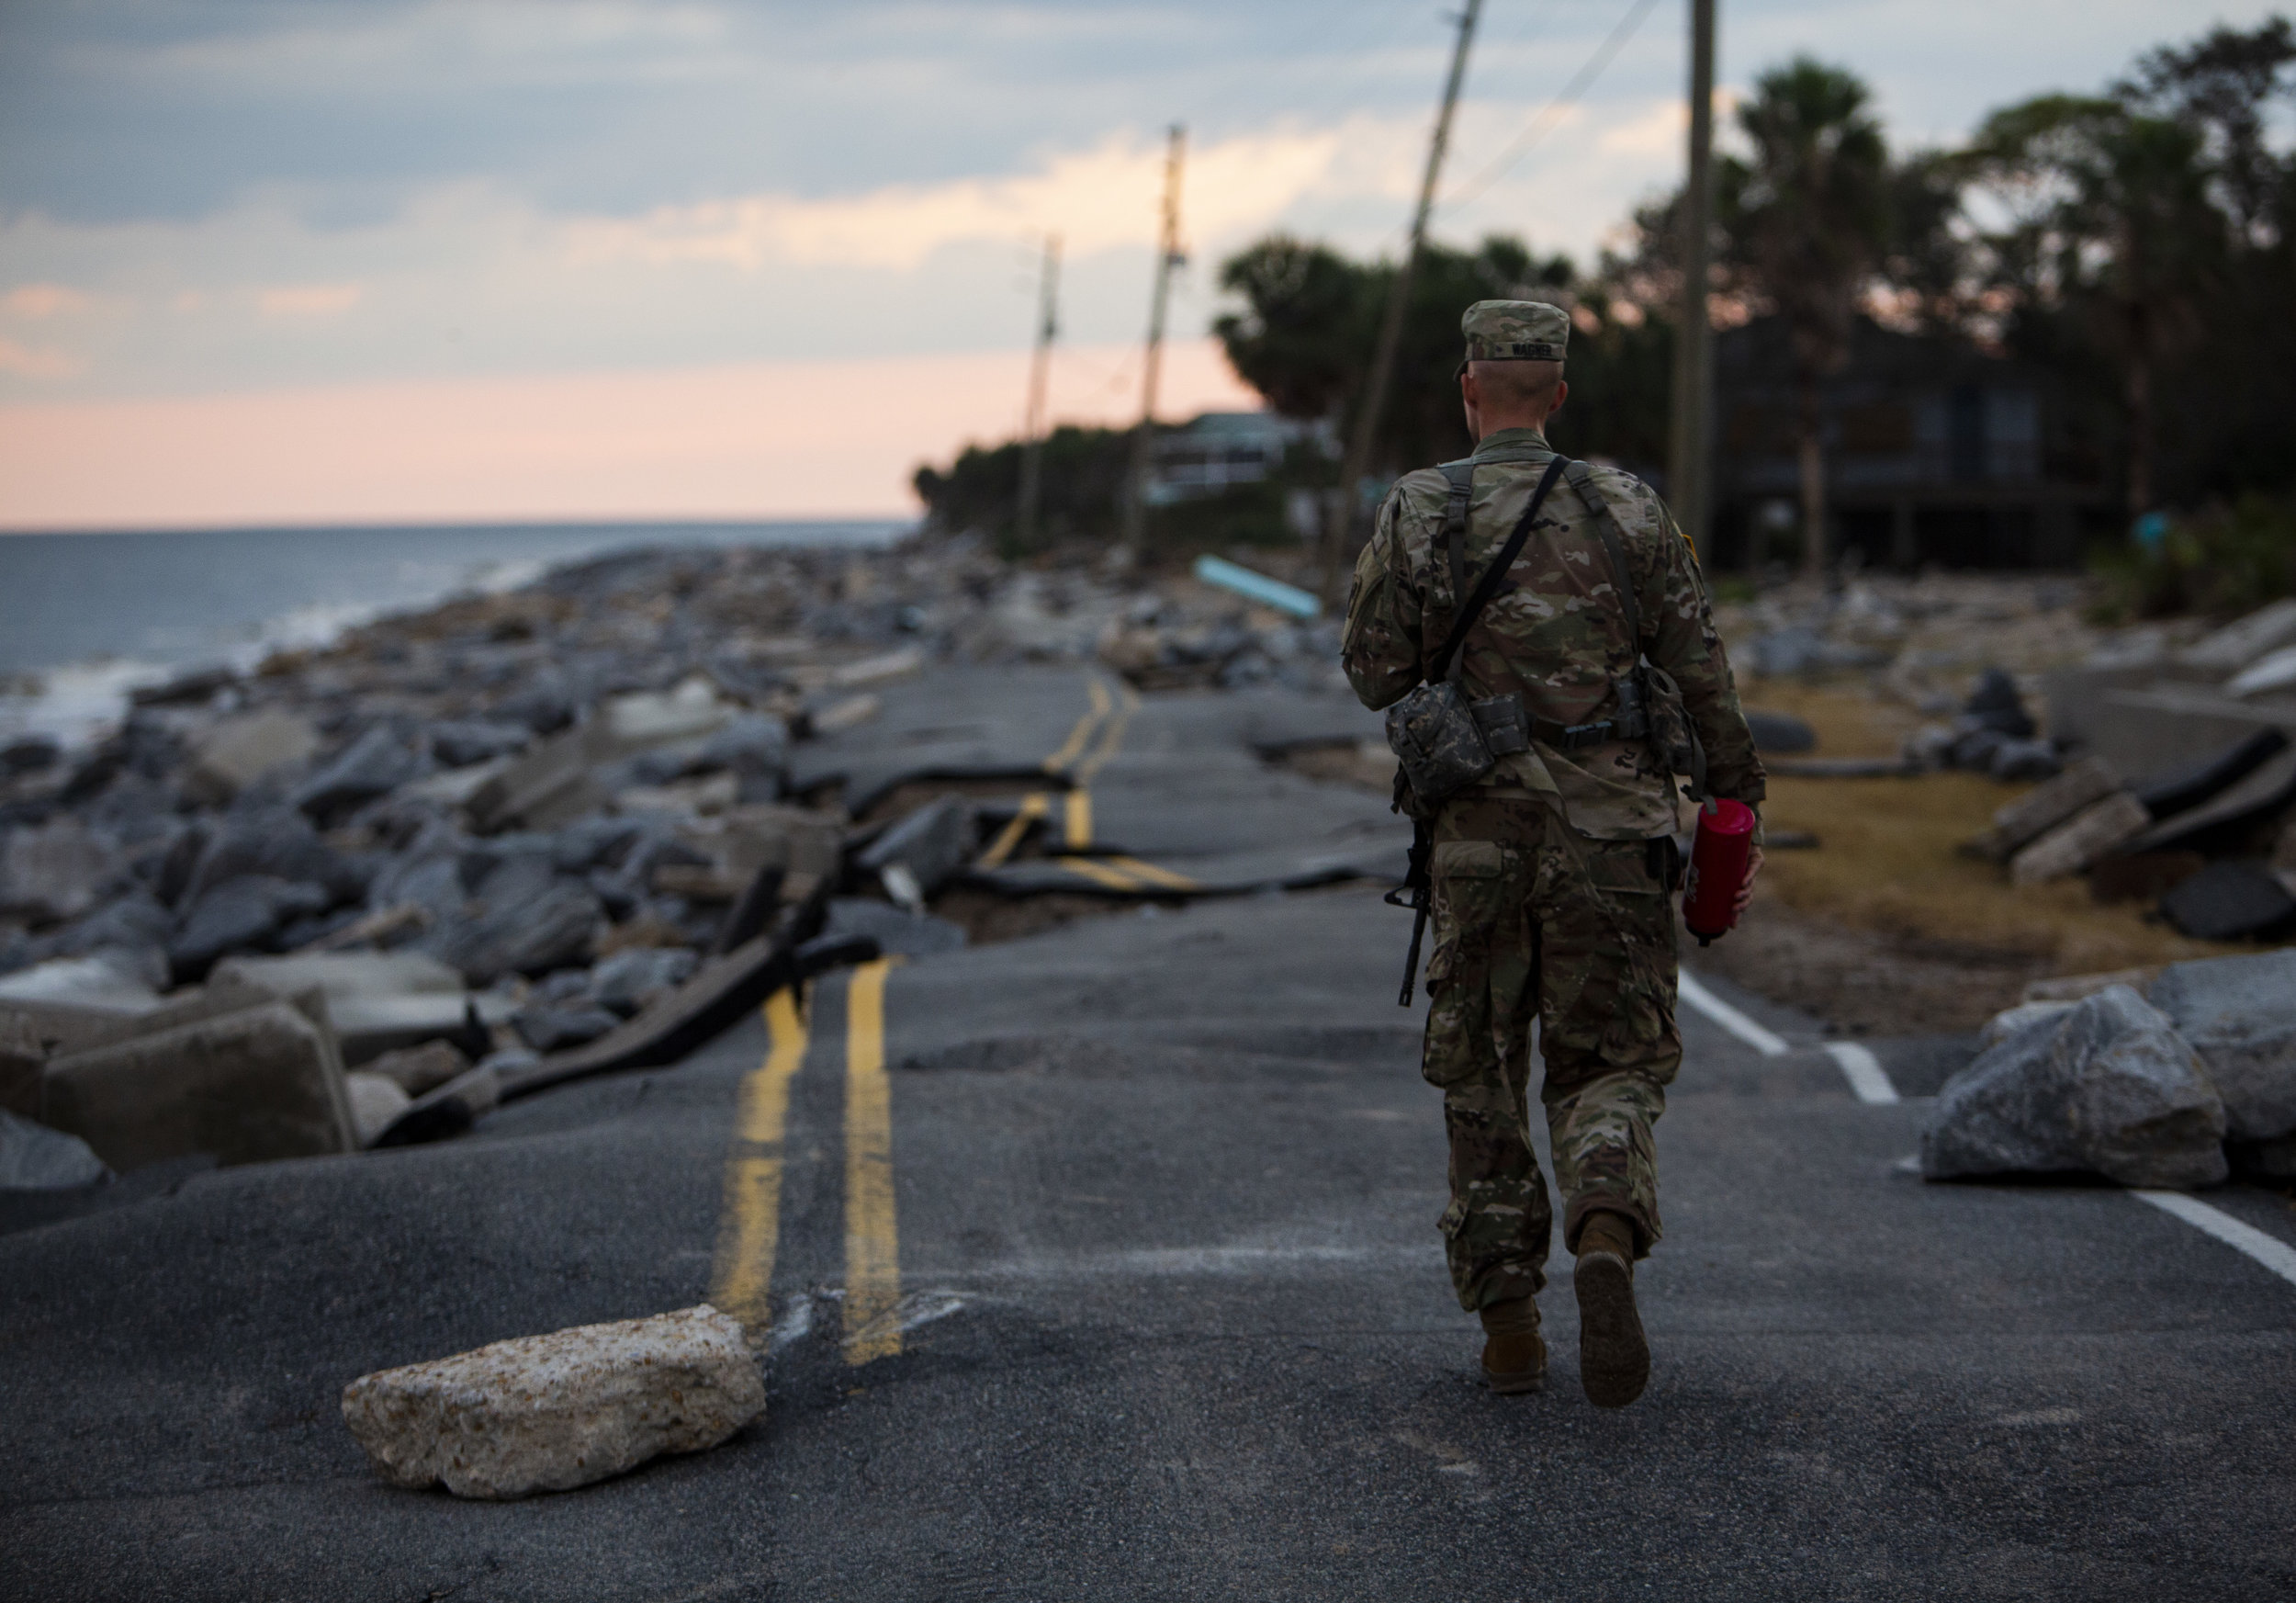  Florida Army National Guard Lt. Matt Wagner walks along what is left of Alligator Drive in Alligator Point on October 11, 2018, one day after Hurricane Michael hit the area. The National Guard descended on the area around 4 p.m.. 